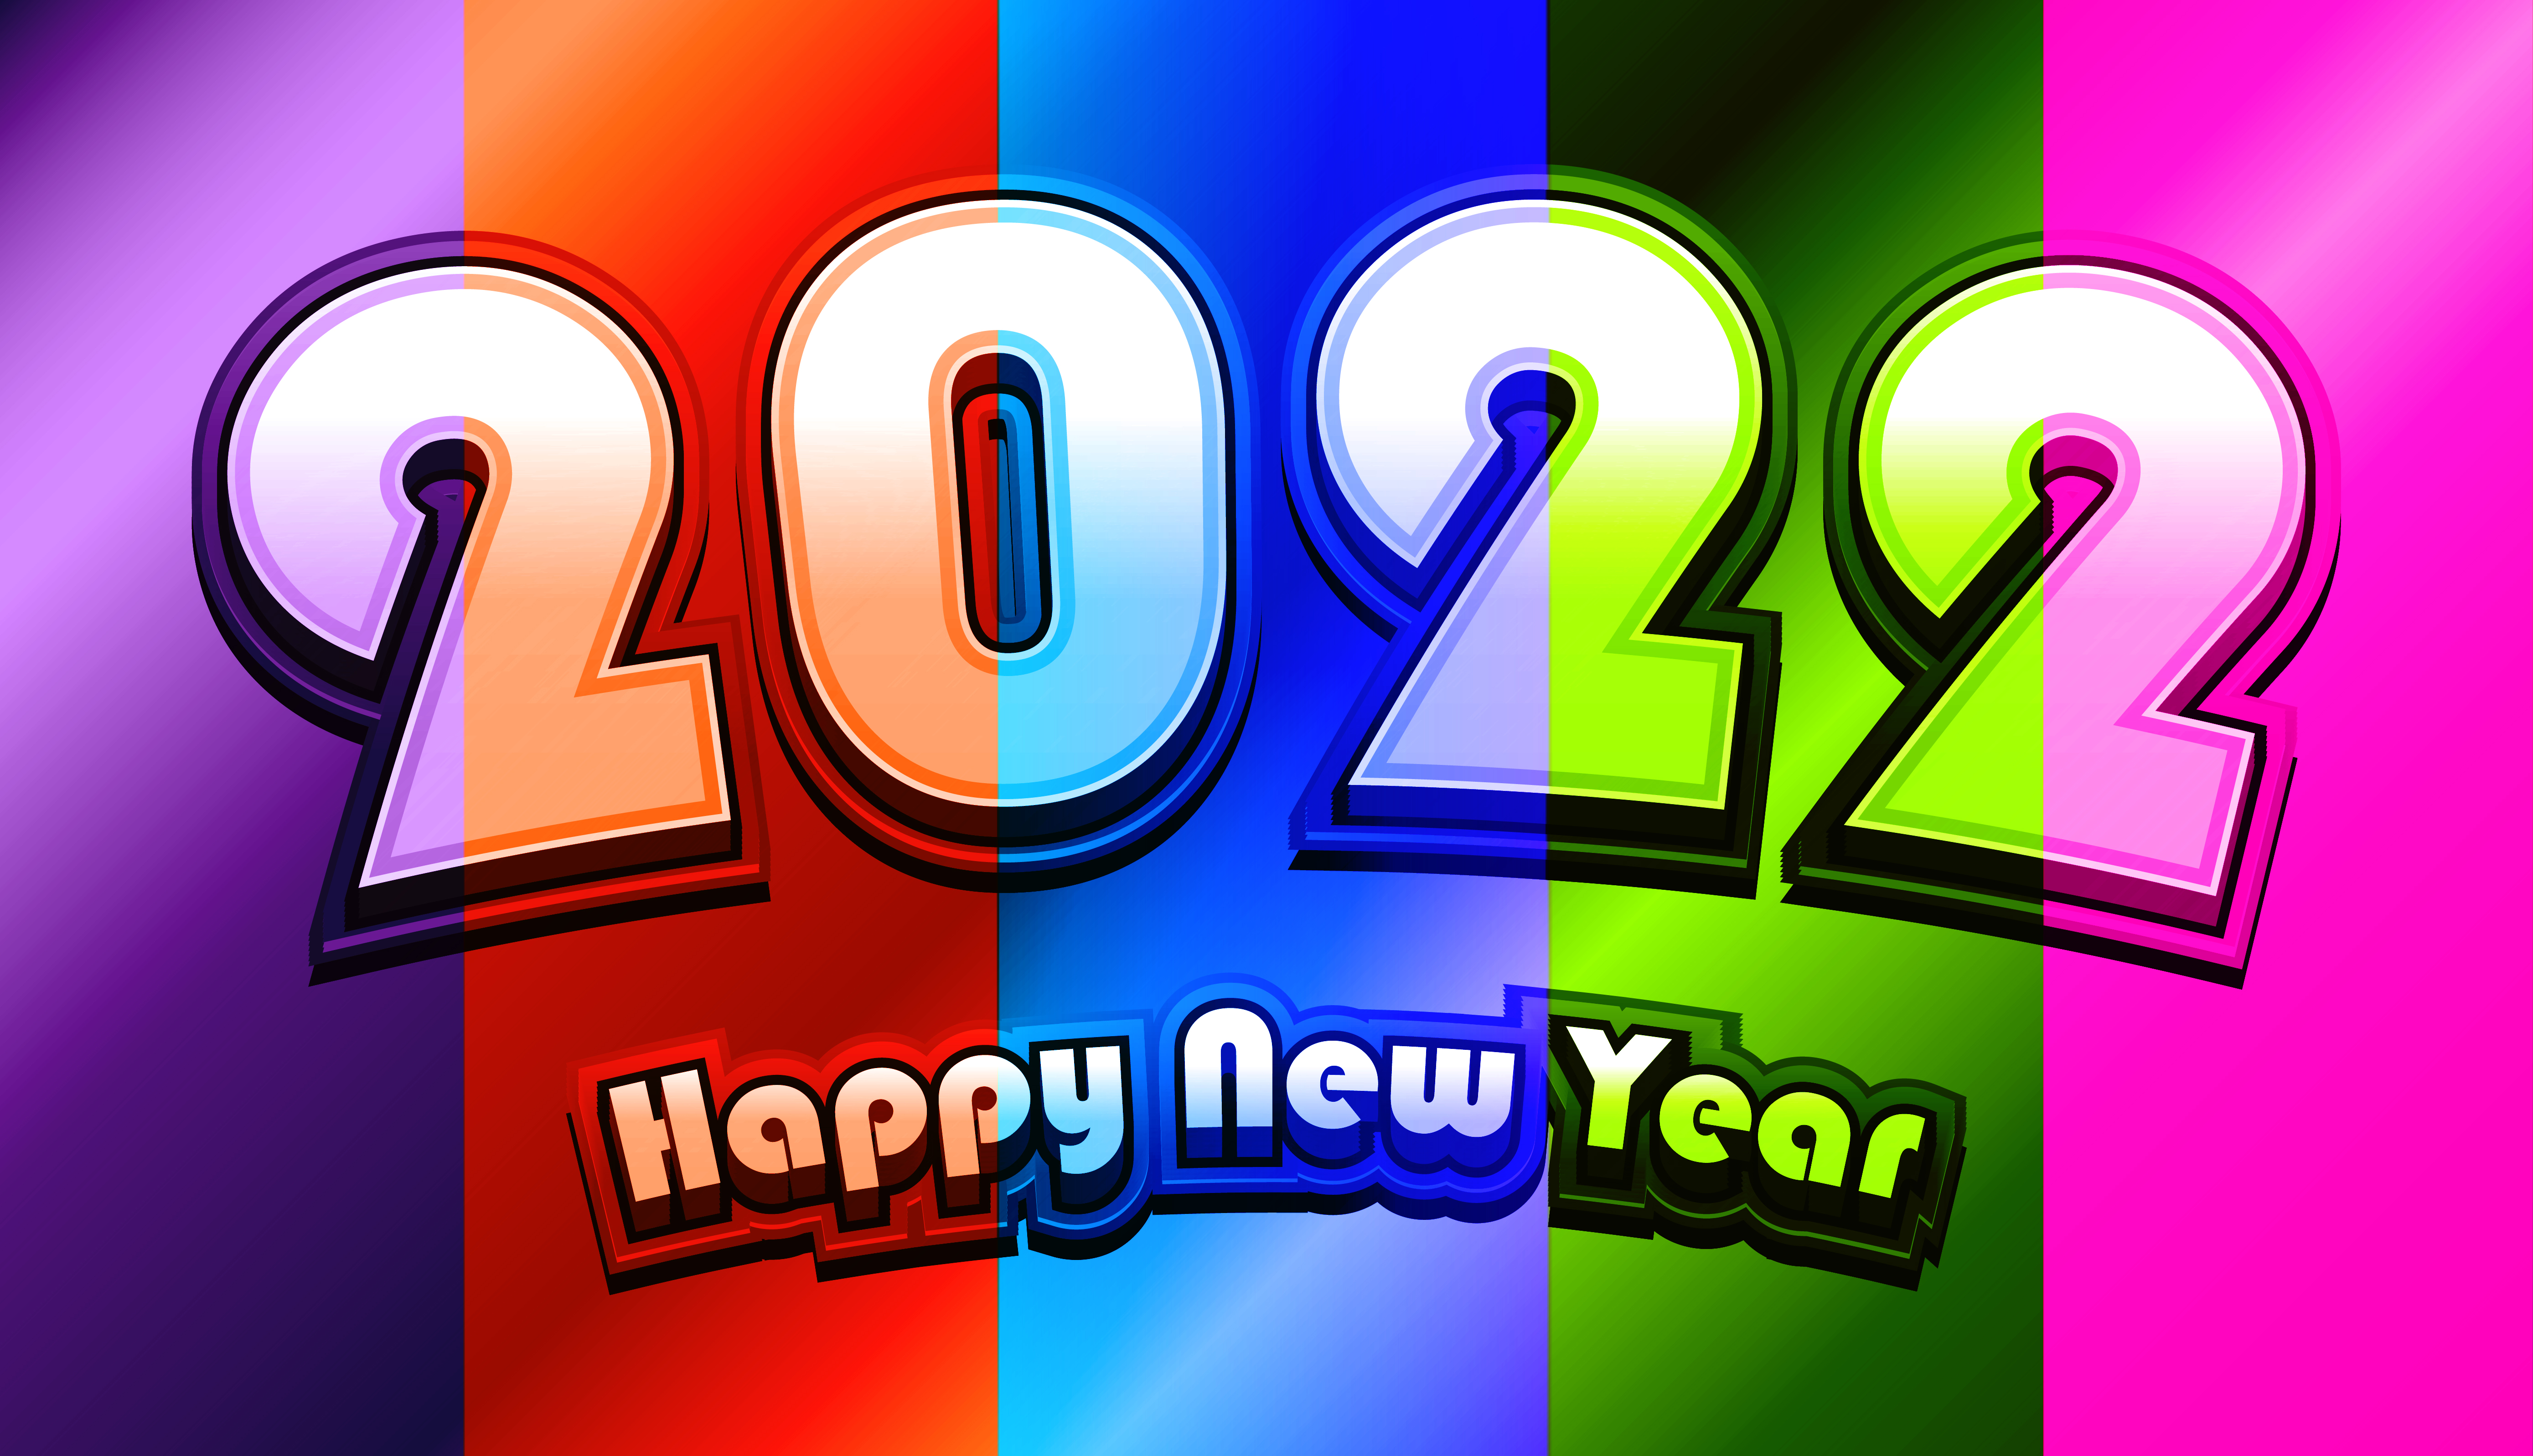 Free Colorful New Year Background 2022 Vector